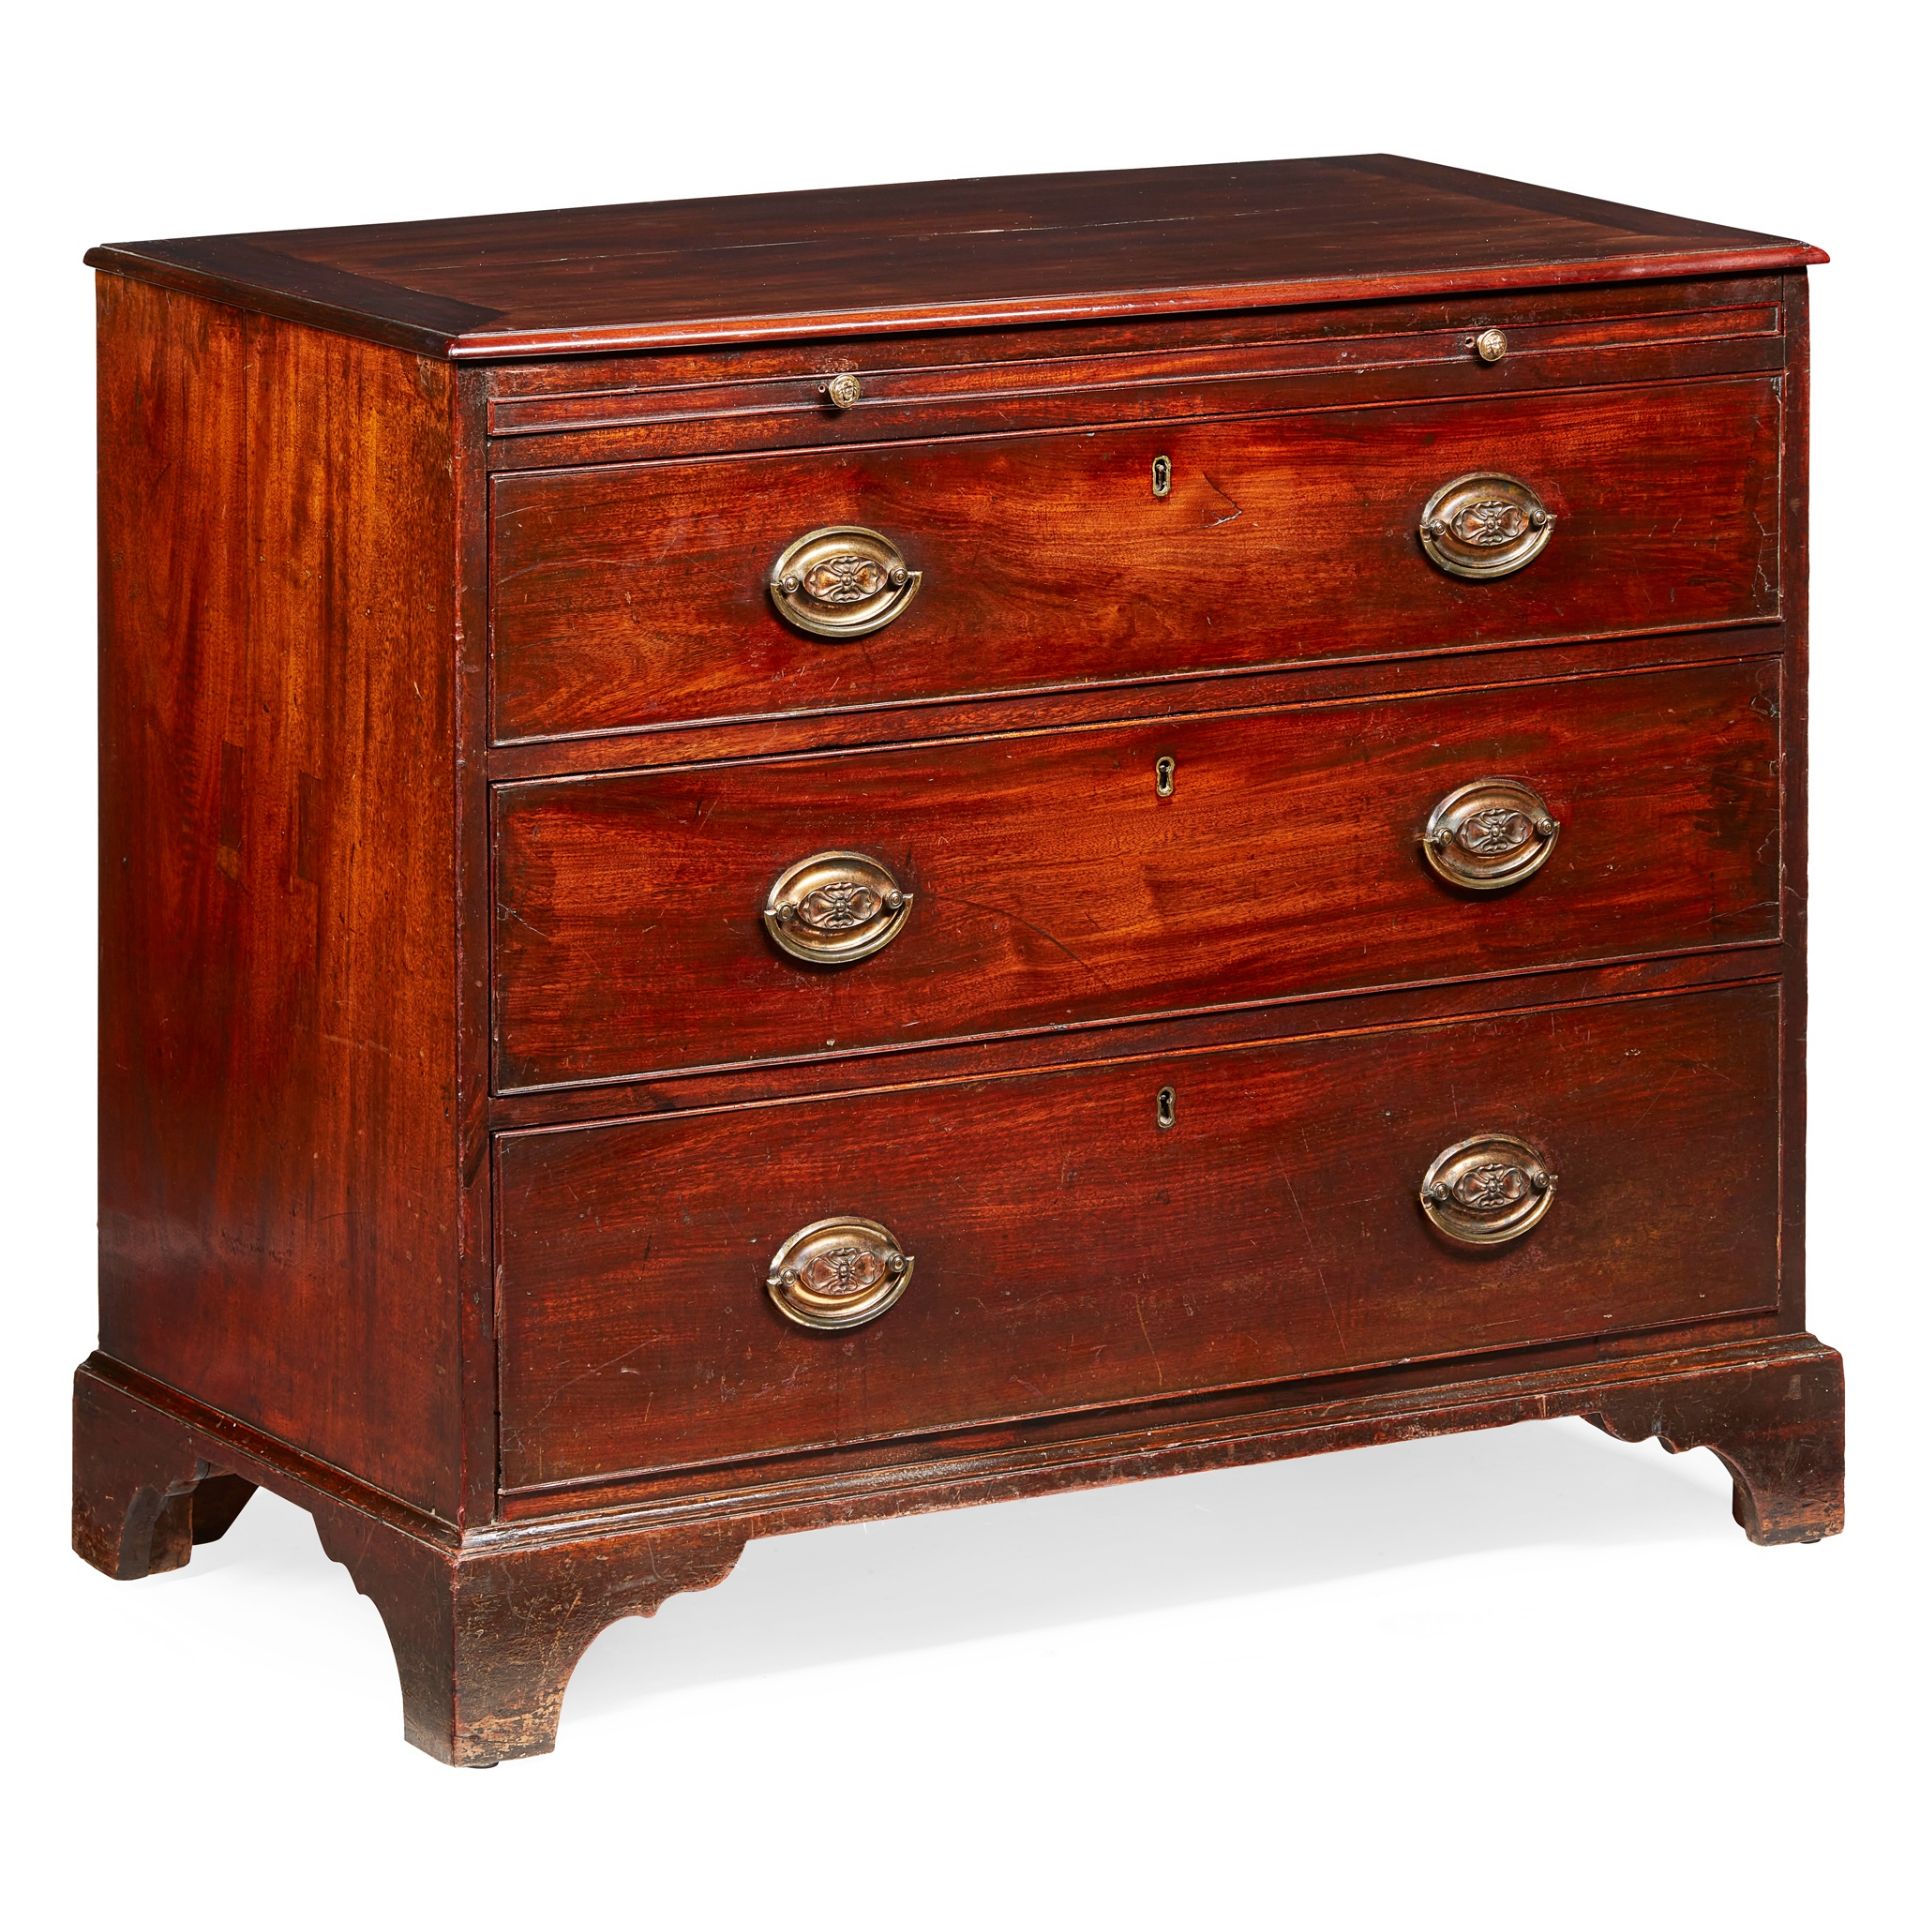 GEORGE III MAHOGANY BACHELOR'S CHEST OF DRAWERS 18TH CENTURY